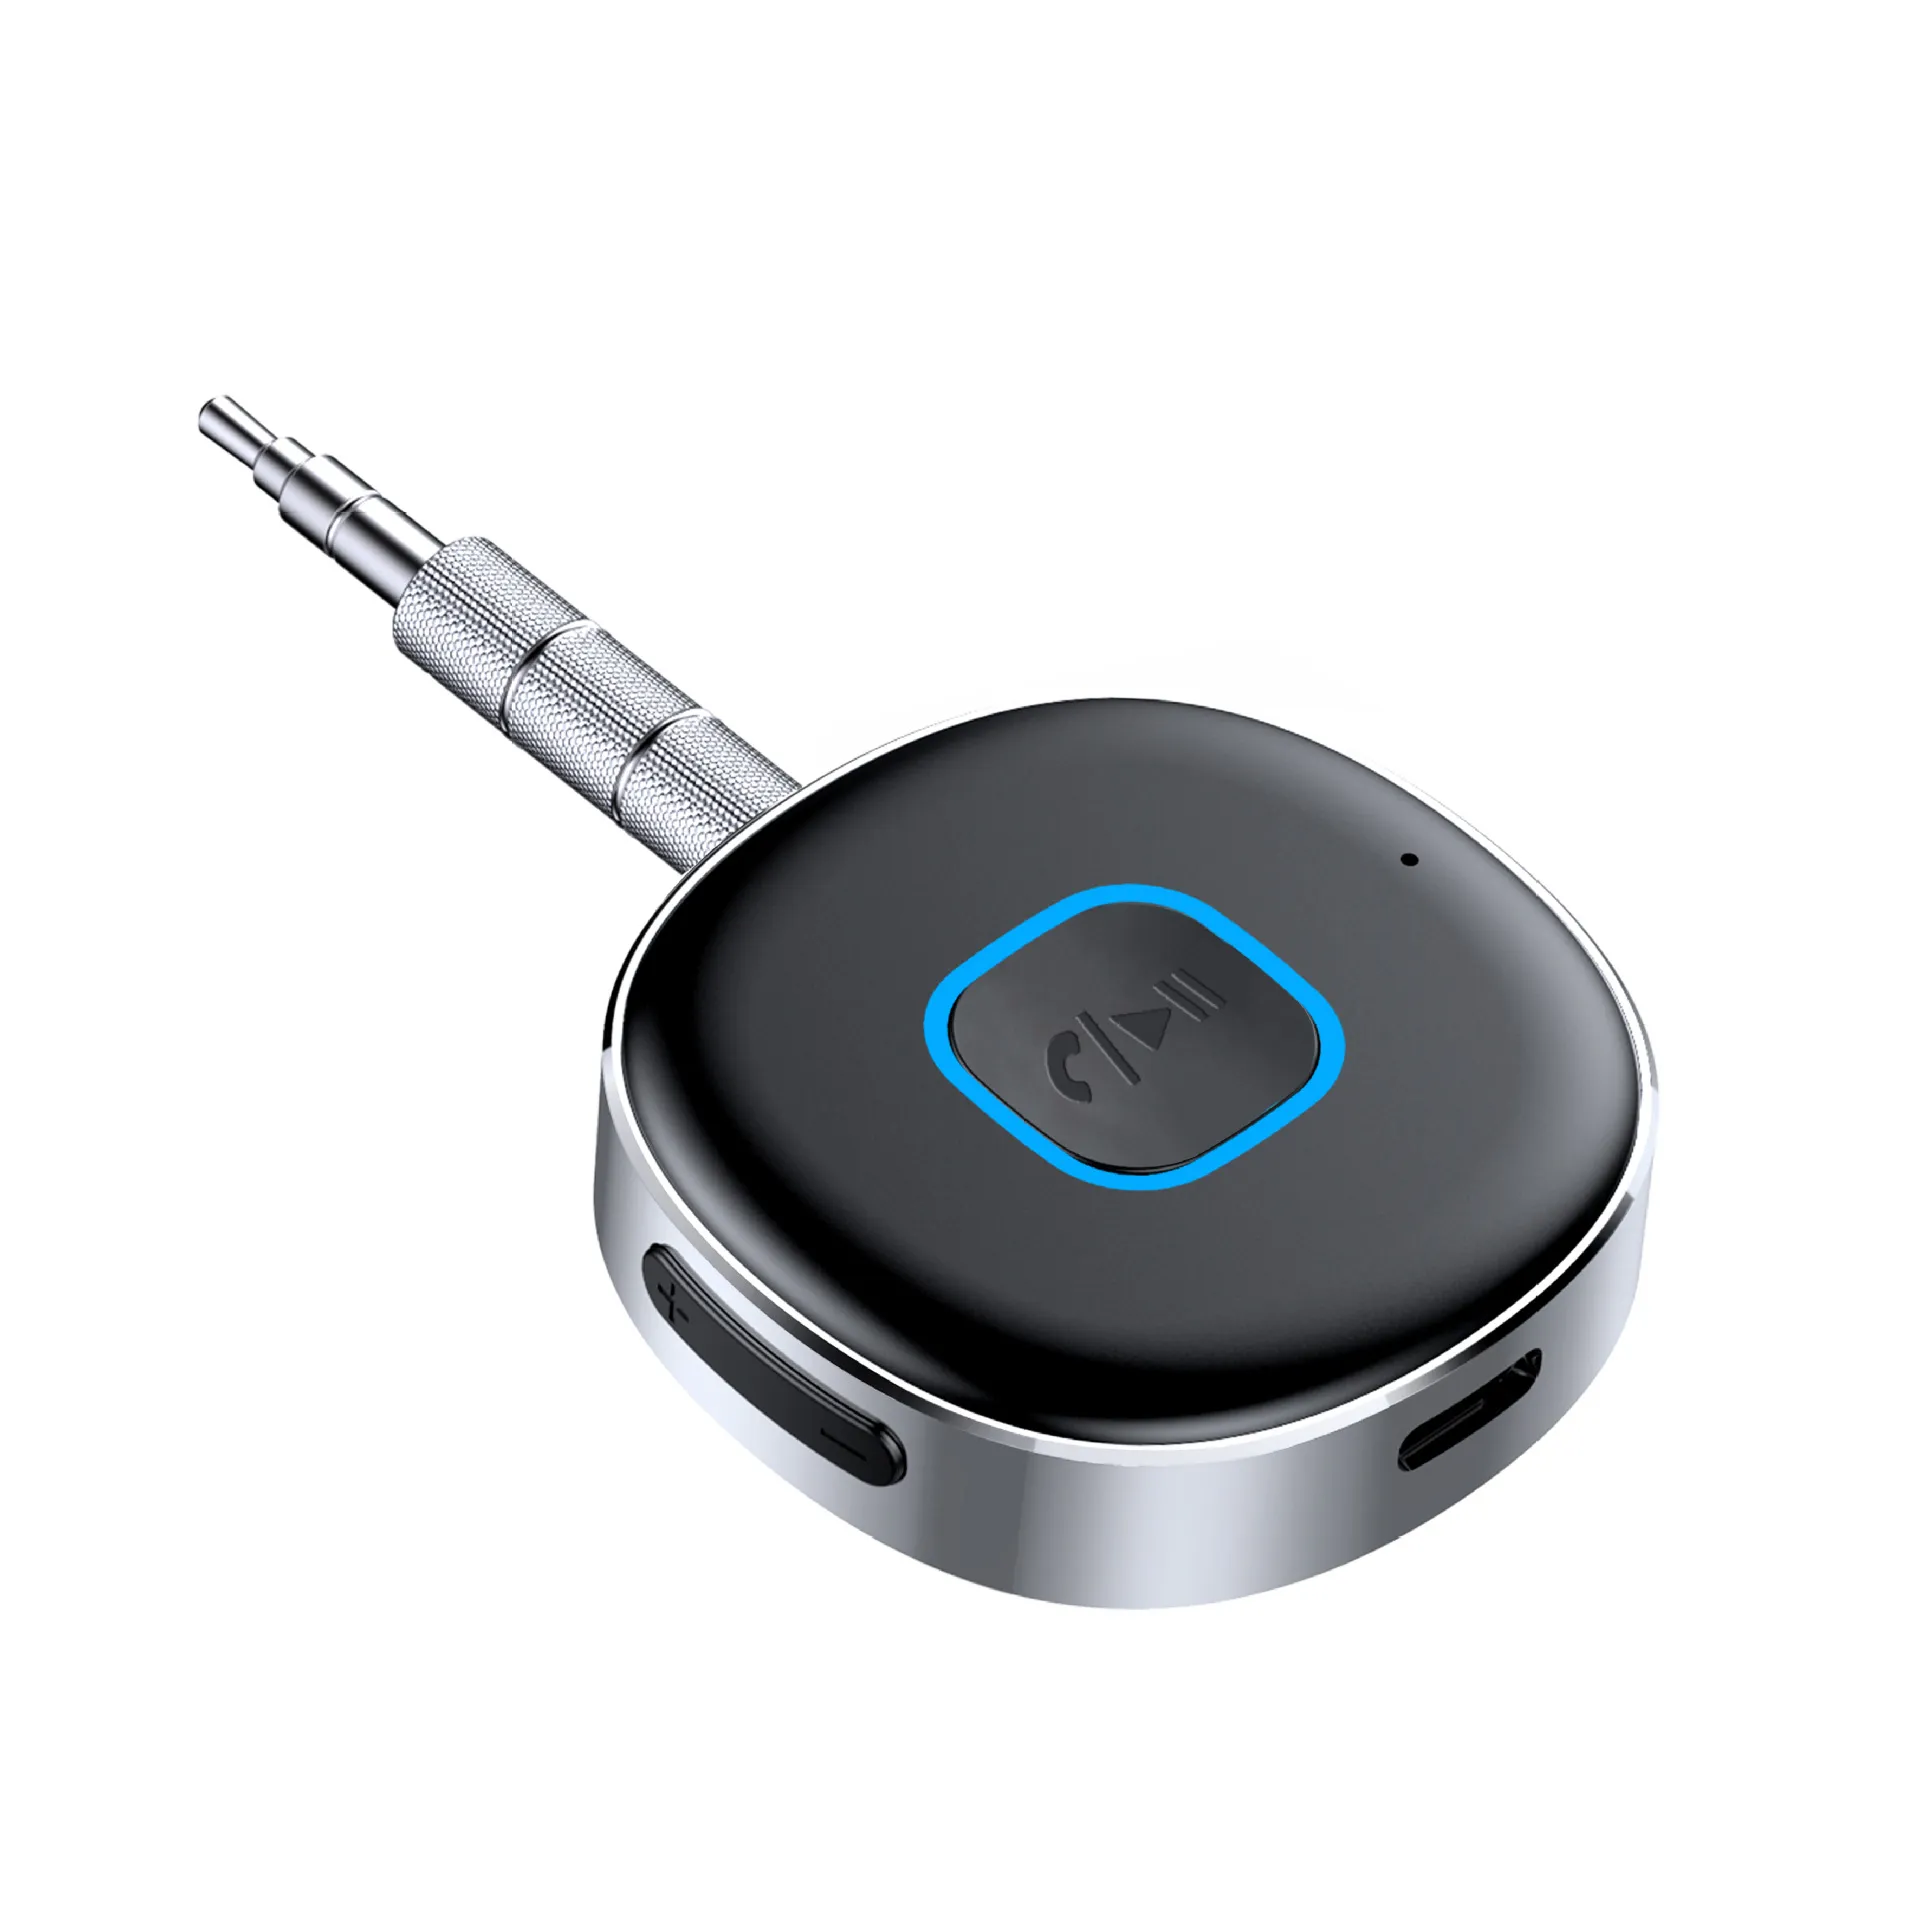 Portable Wireless Audio Adapter With Microphone J33 Bluetooth 5.0 Music  Receiver AUX For Car, 3.5mm Aux From Che9999, $7.04